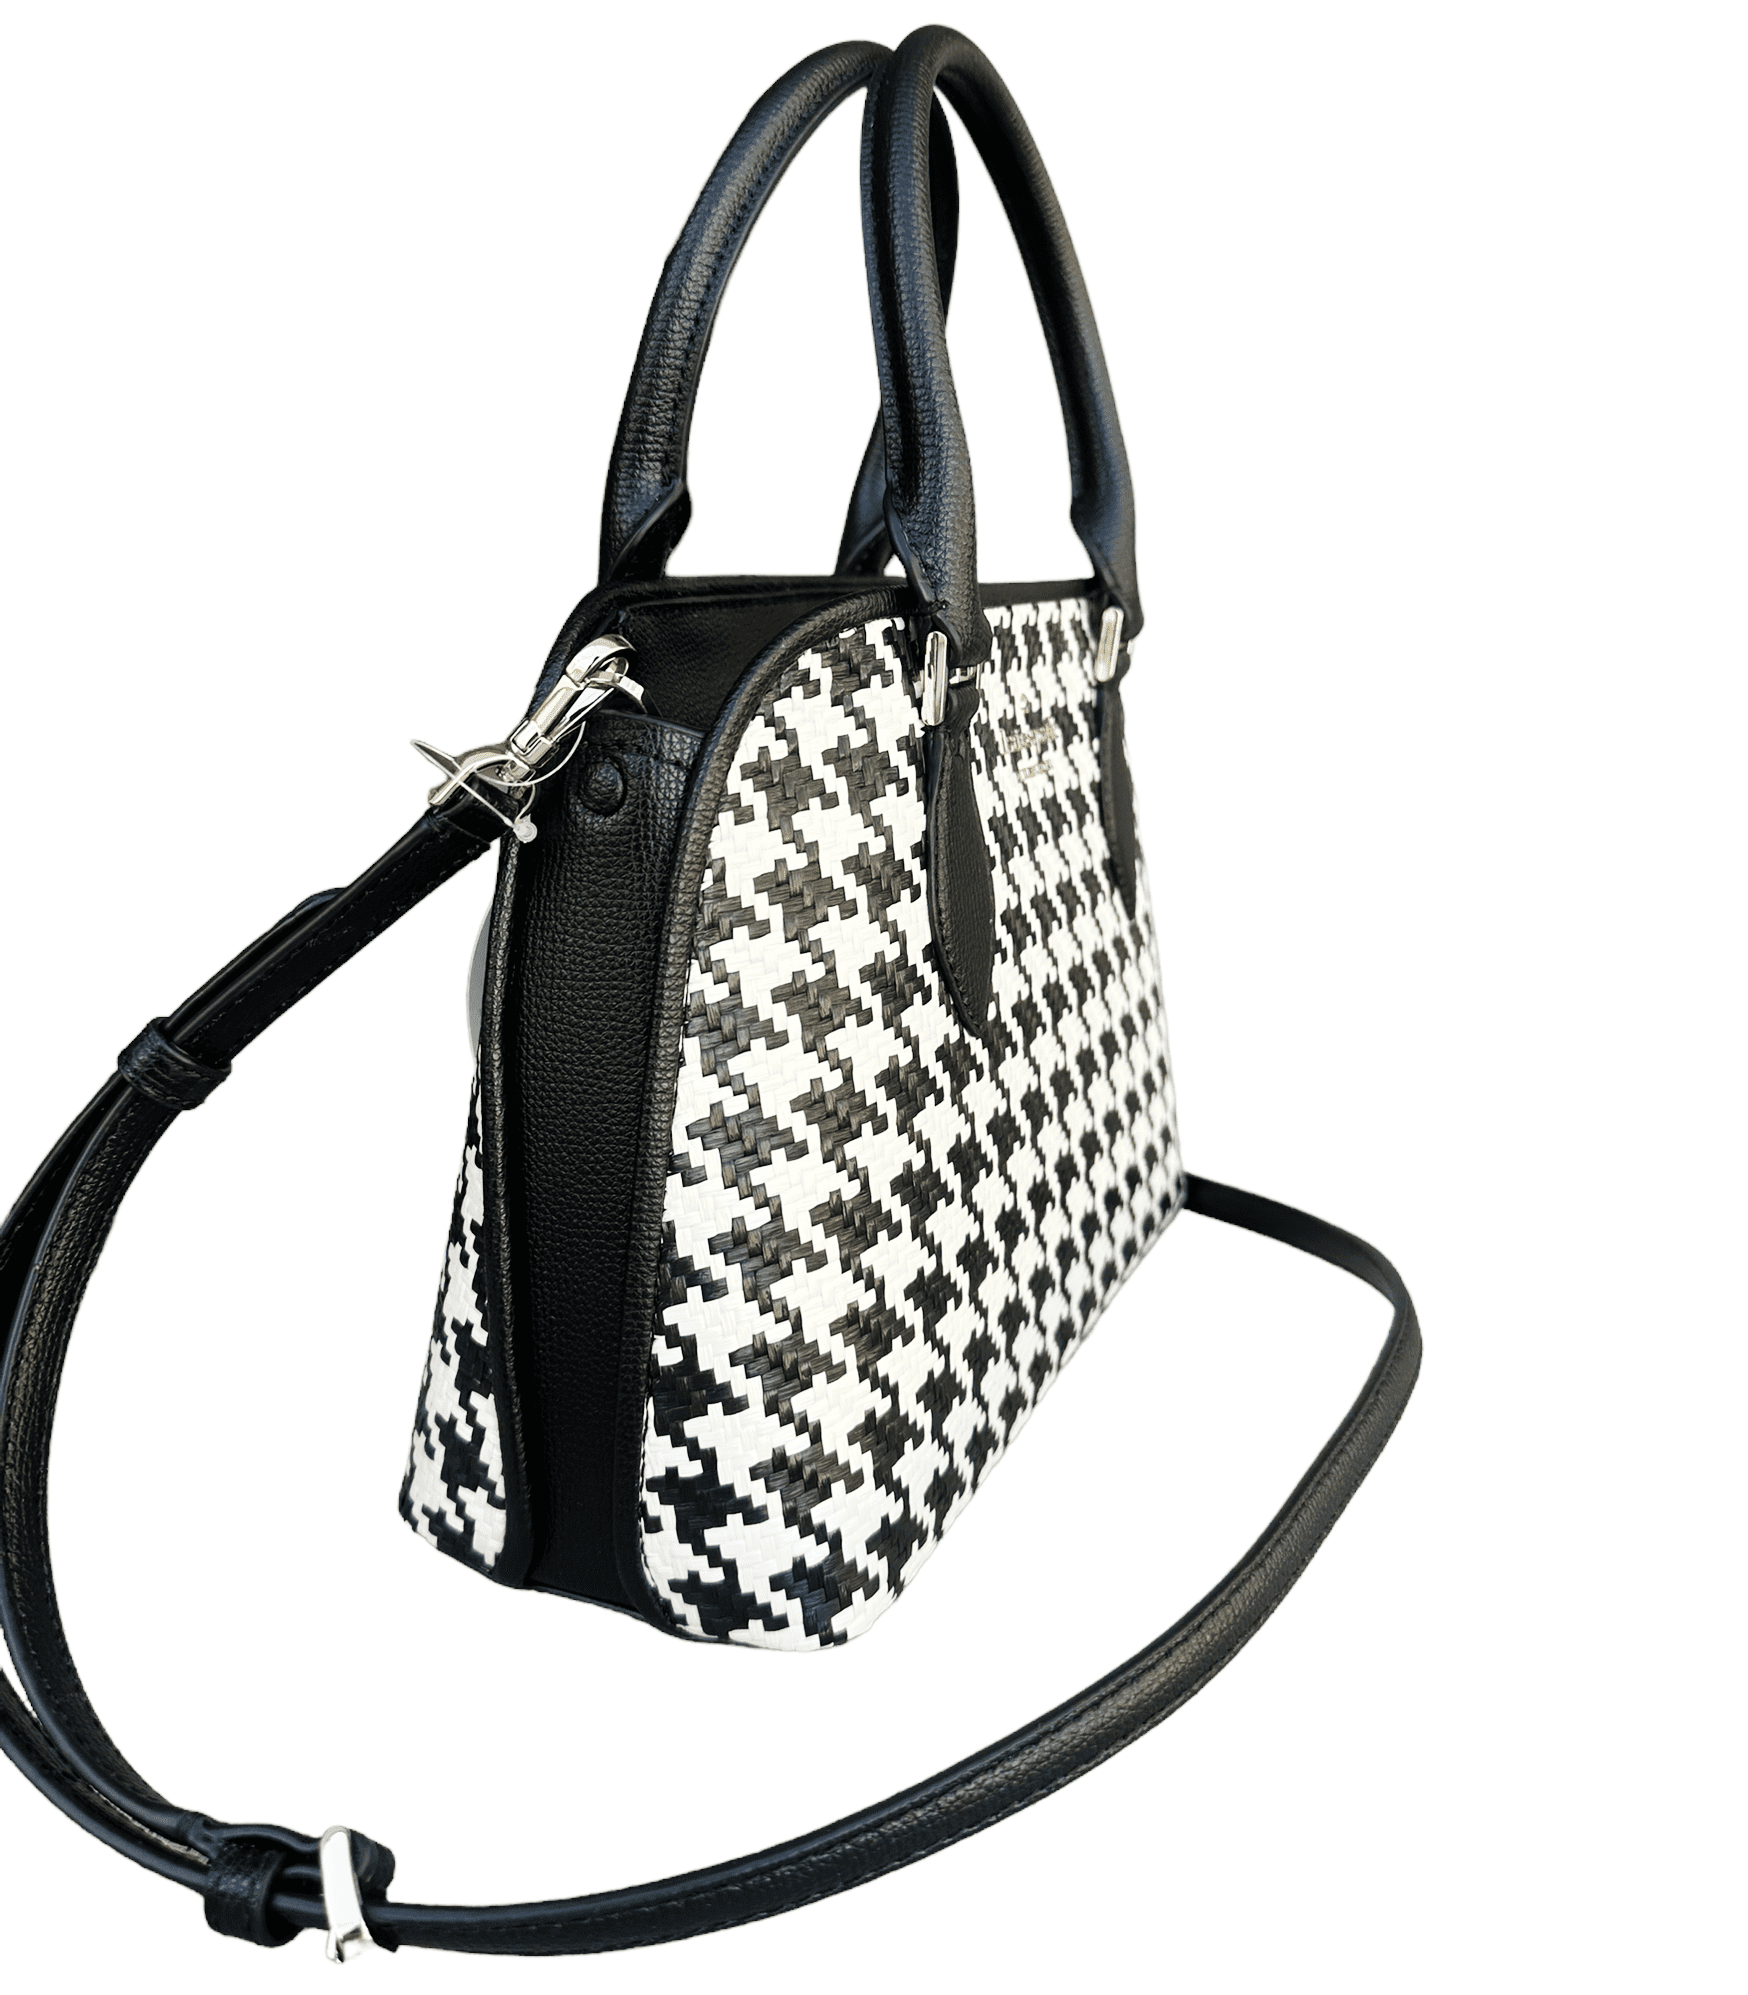 kate spade, Bags, Kate Spade Cruise Houndstooth Patterned Straw Medium  Tote Crossbody Black Nwt